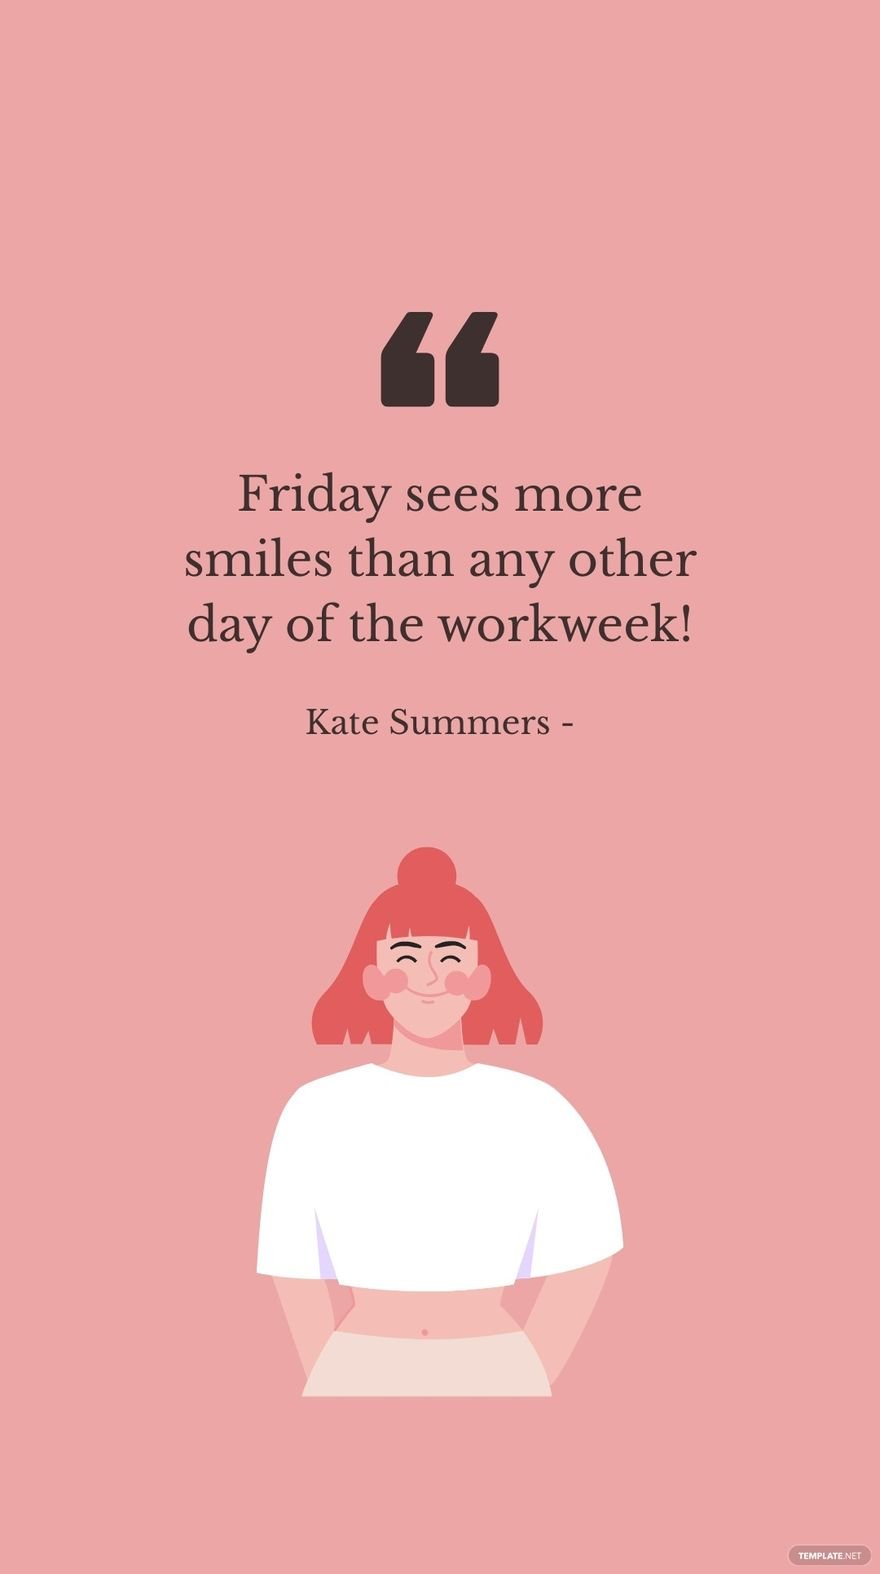 Free Kate Summers - Friday sees more smiles than any other day of the workweek!